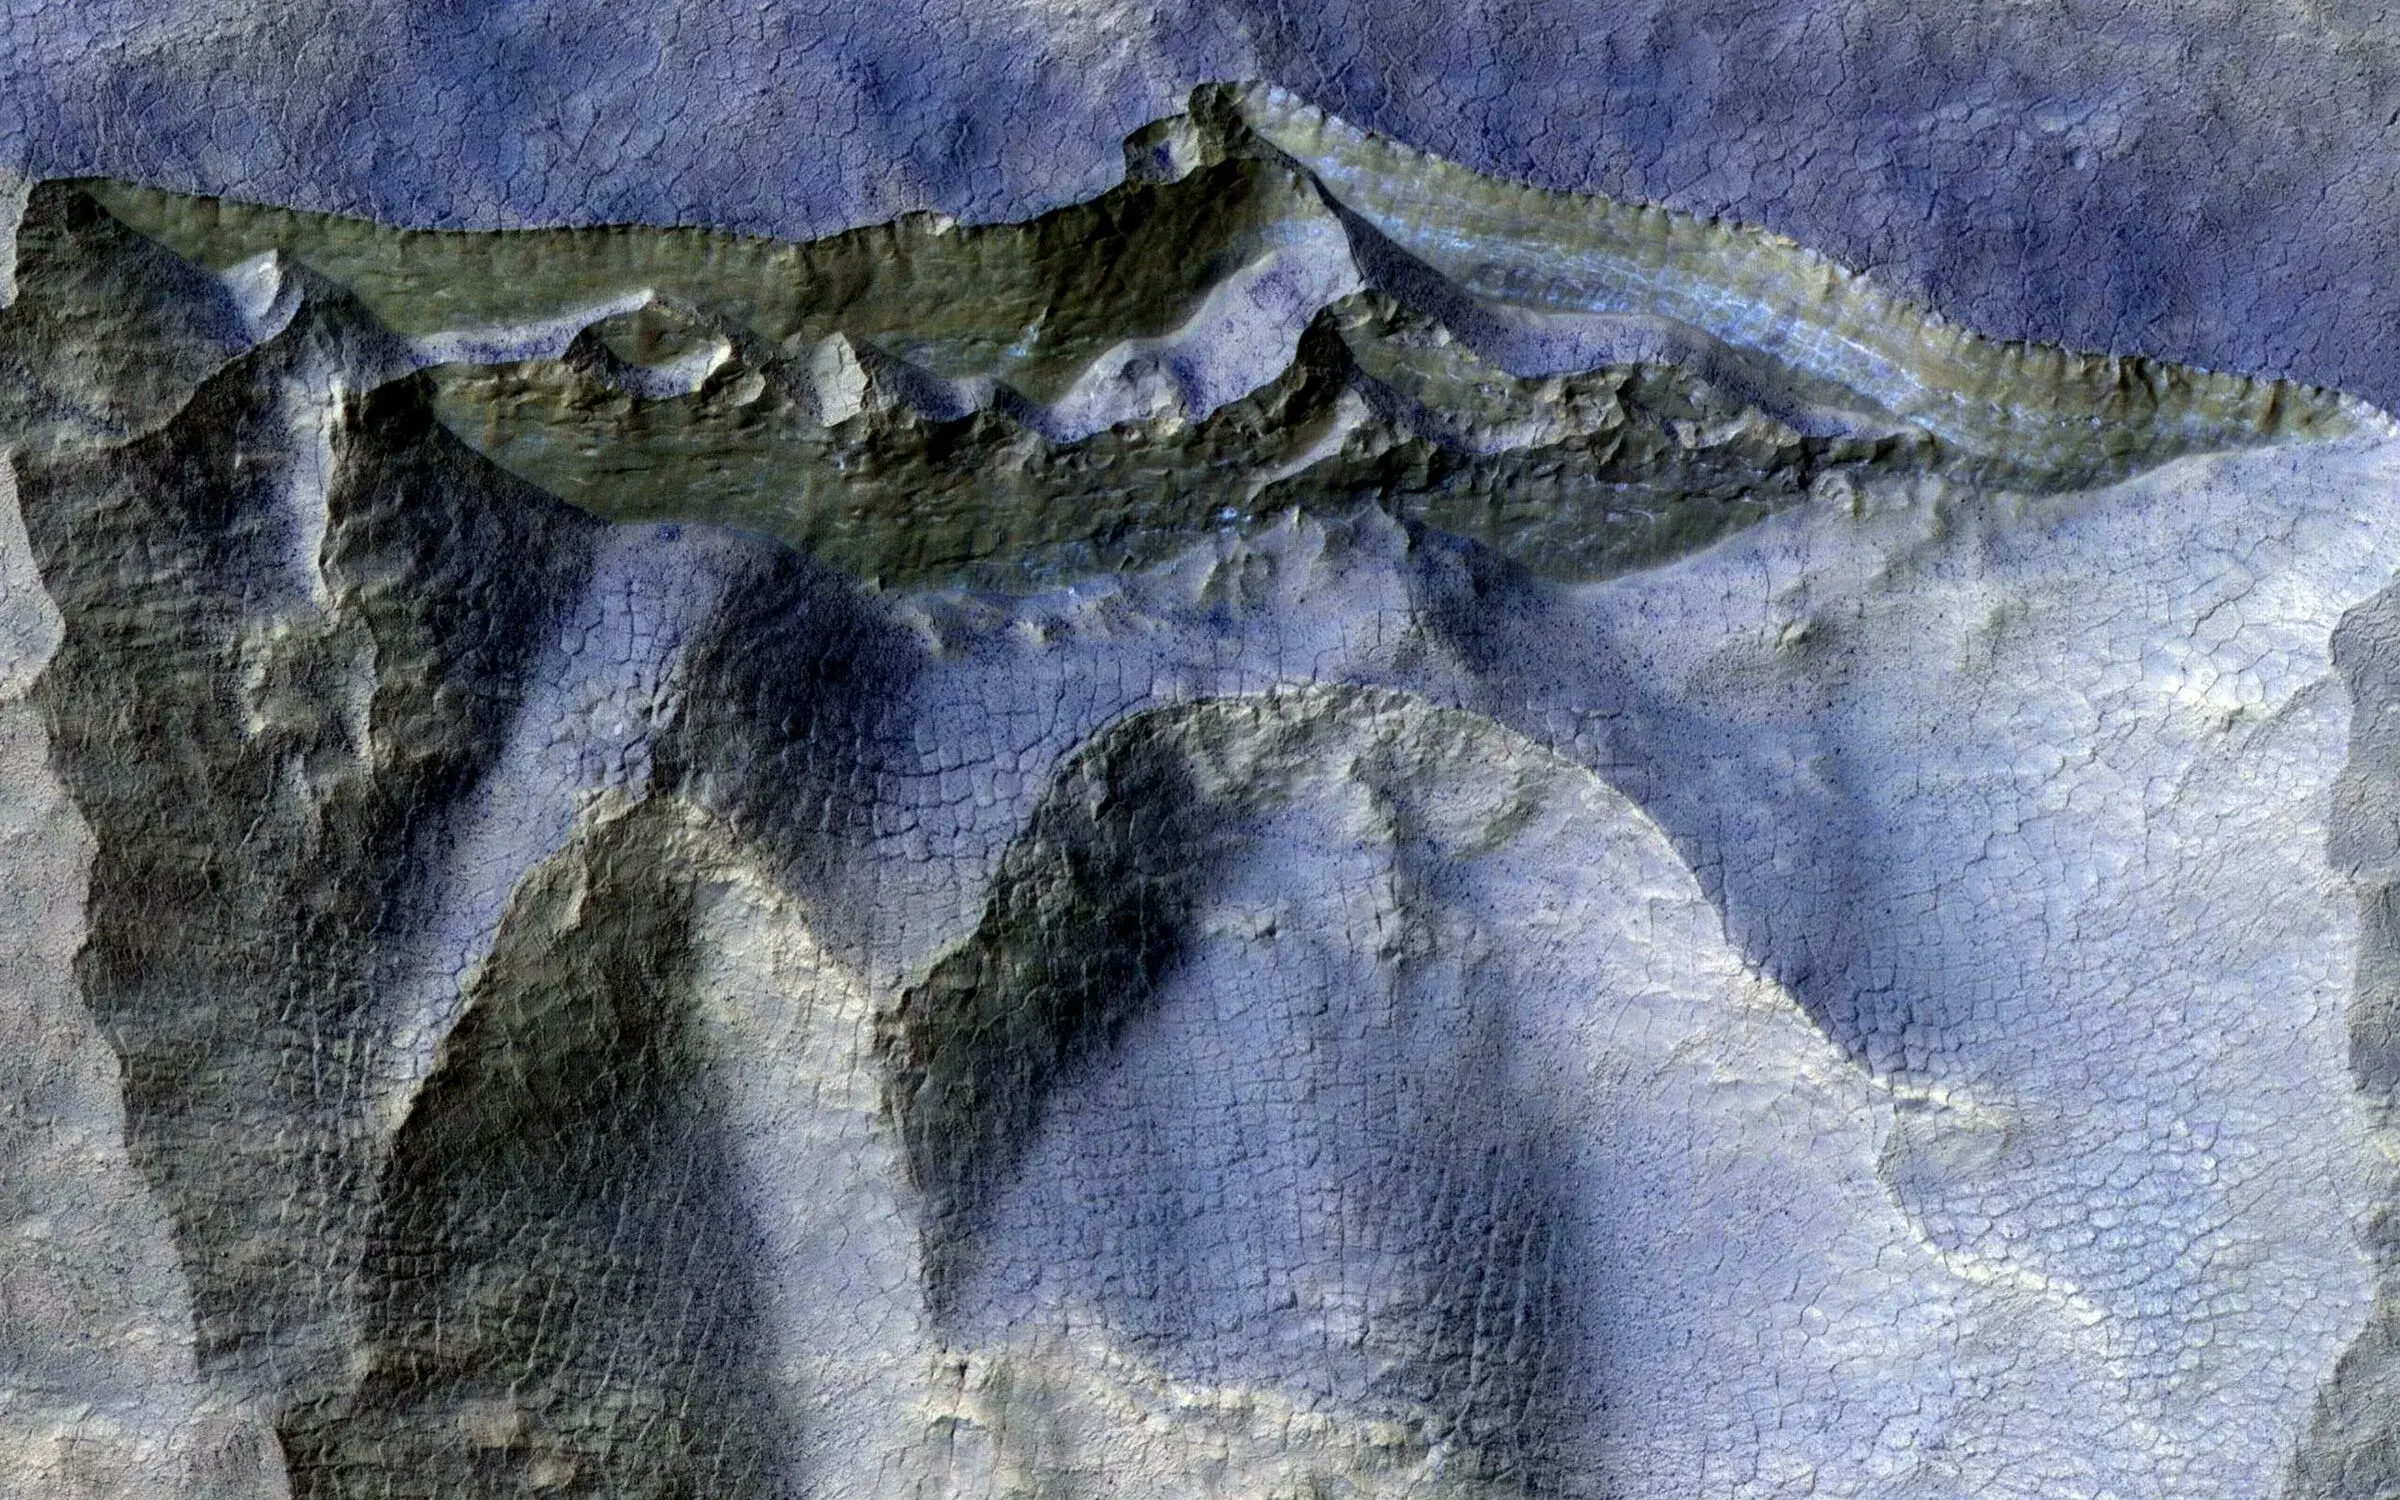 ICY MARS CLIFFS About one-third of Mars has ice just beneath the surface. Scientists study the ice to learn what early Mars was like and whether it was warm and wet long enough for life to take hold. In this false-color image from NASA’s Mars Reconnaissance Orbiter, layers of bluish ice can be seen layered inside an exposed brownish cliff face. MRO takes repeat images of scenes like this, occasionally revealing ice boulders that have tumbled down slopes. NASA / JPL-Caltech / University of Arizona